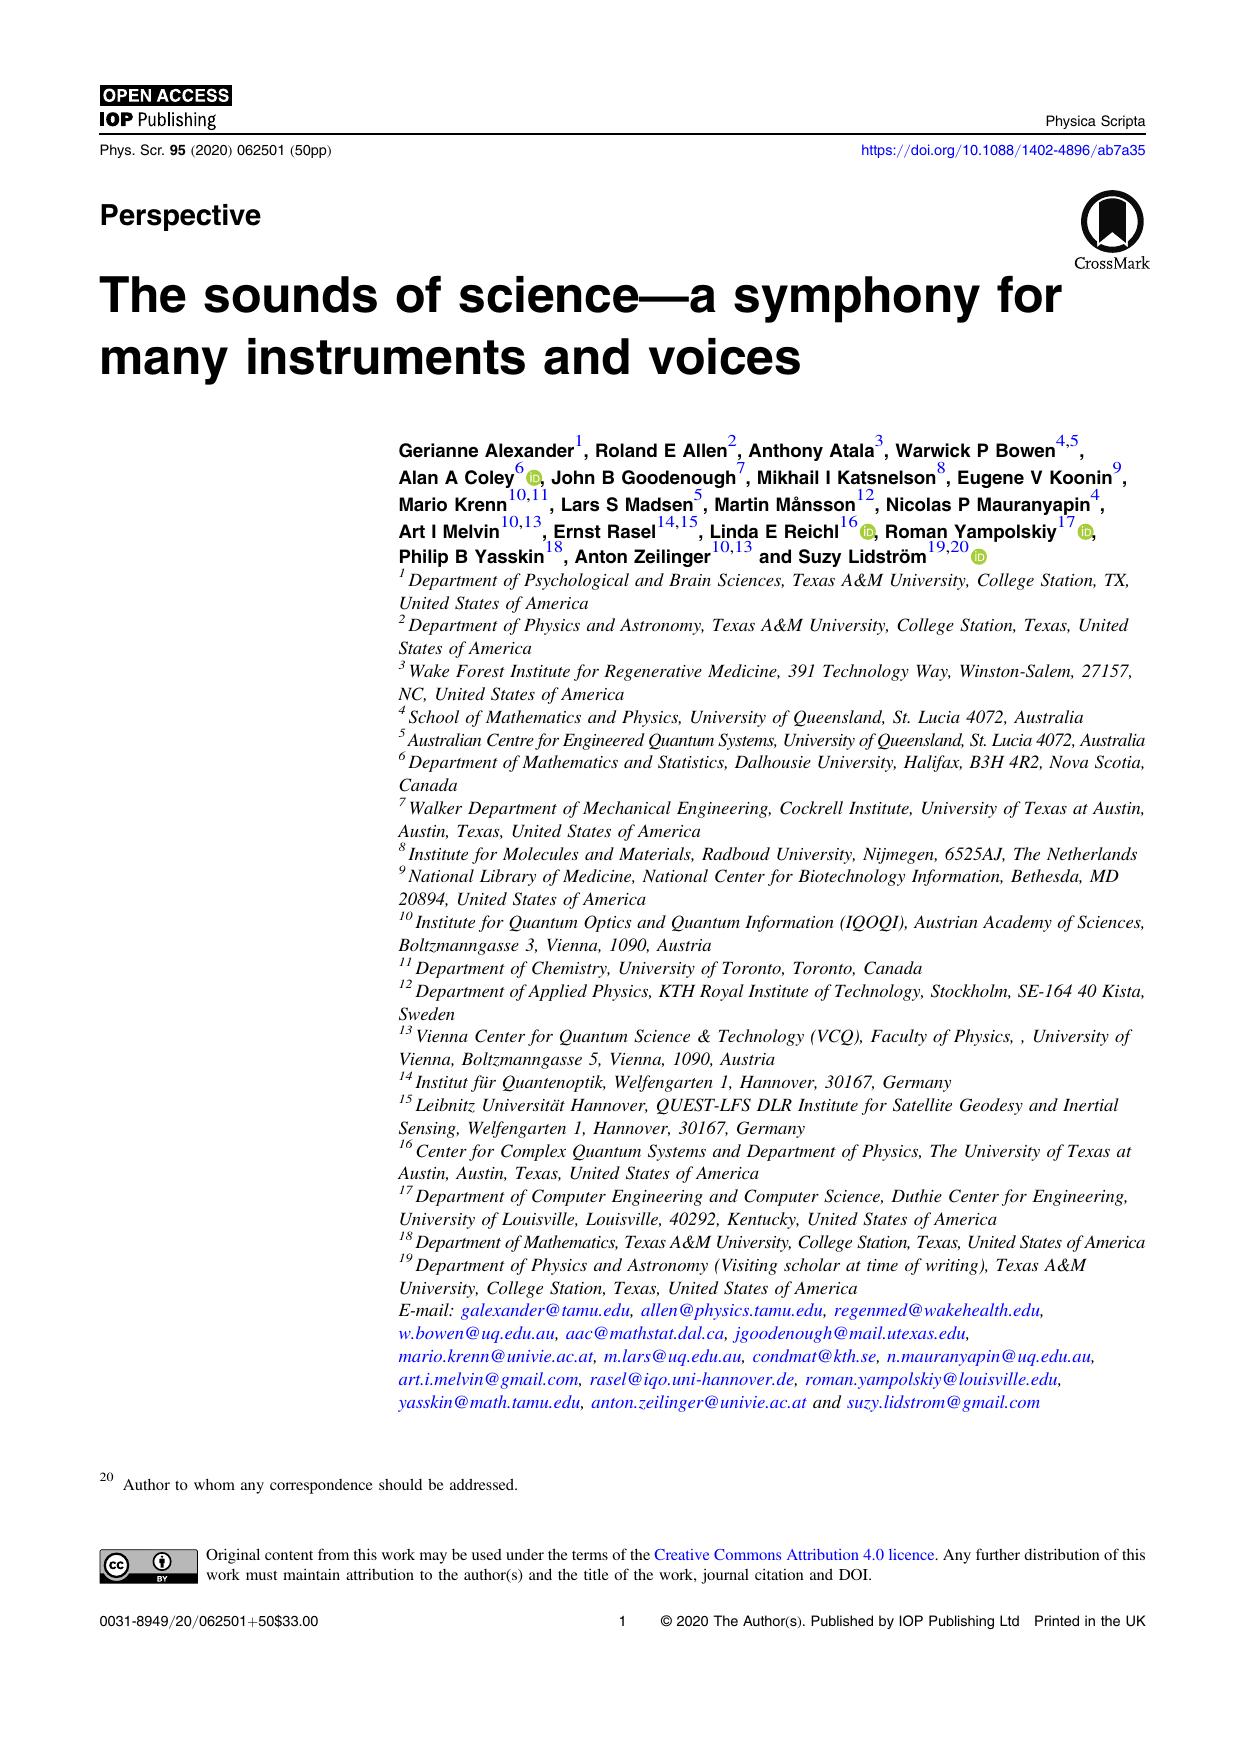 The sounds of scienceâa symphony for many instruments and voices by unknow